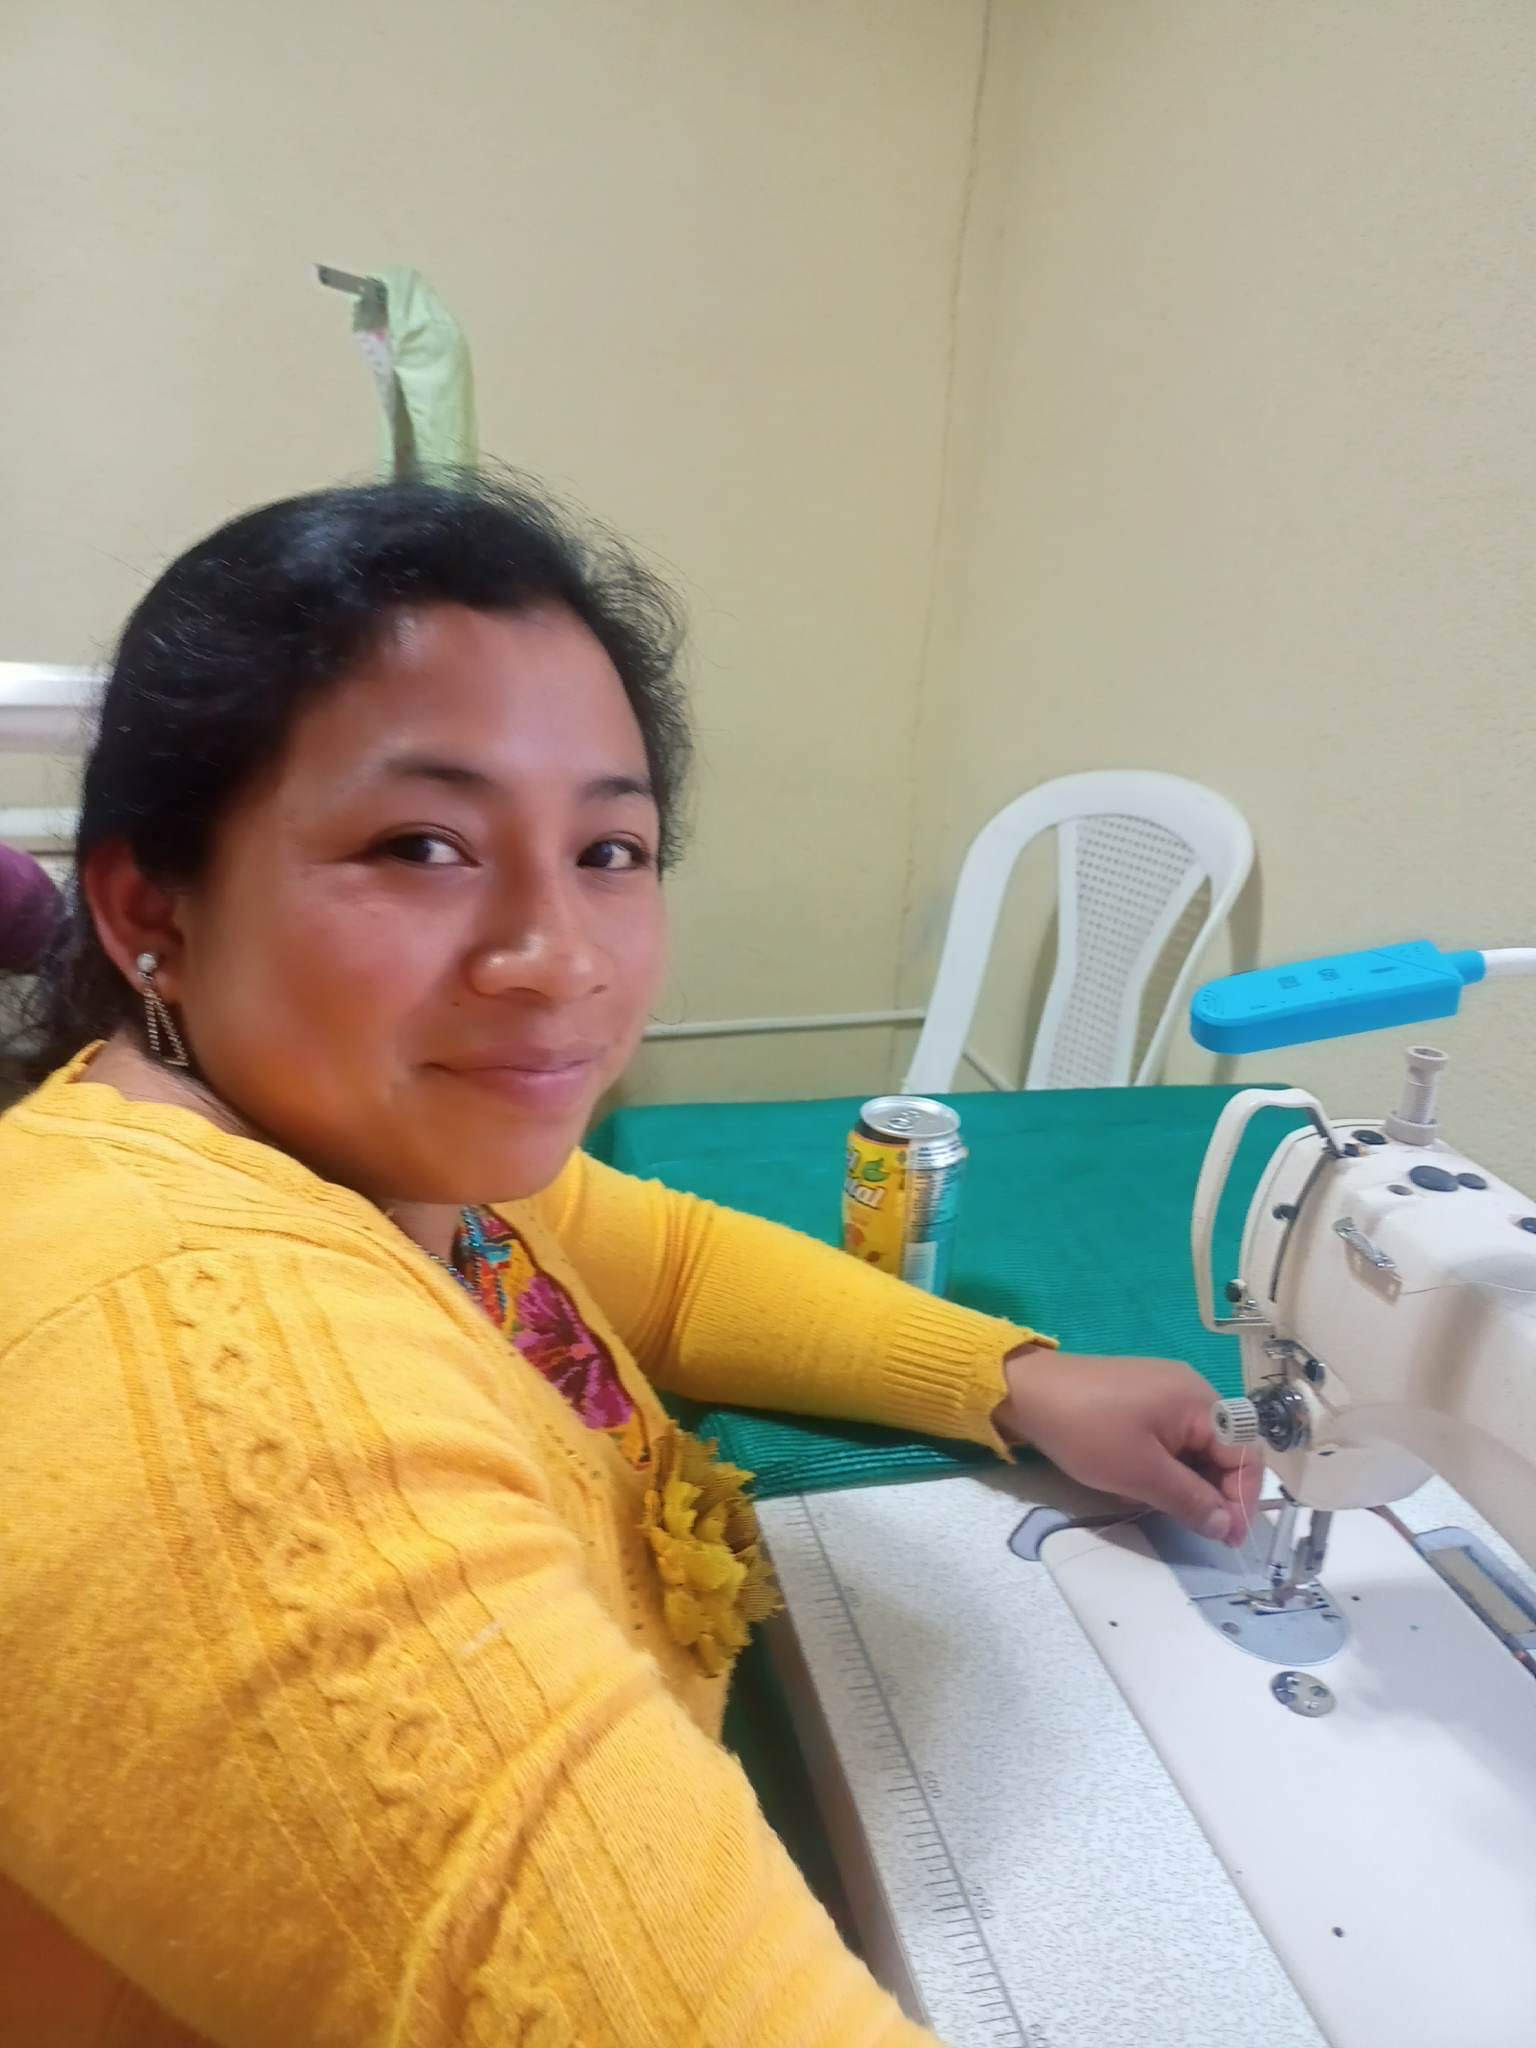 How Be Humanitarian Changed the Life of a Guatemalan Mom